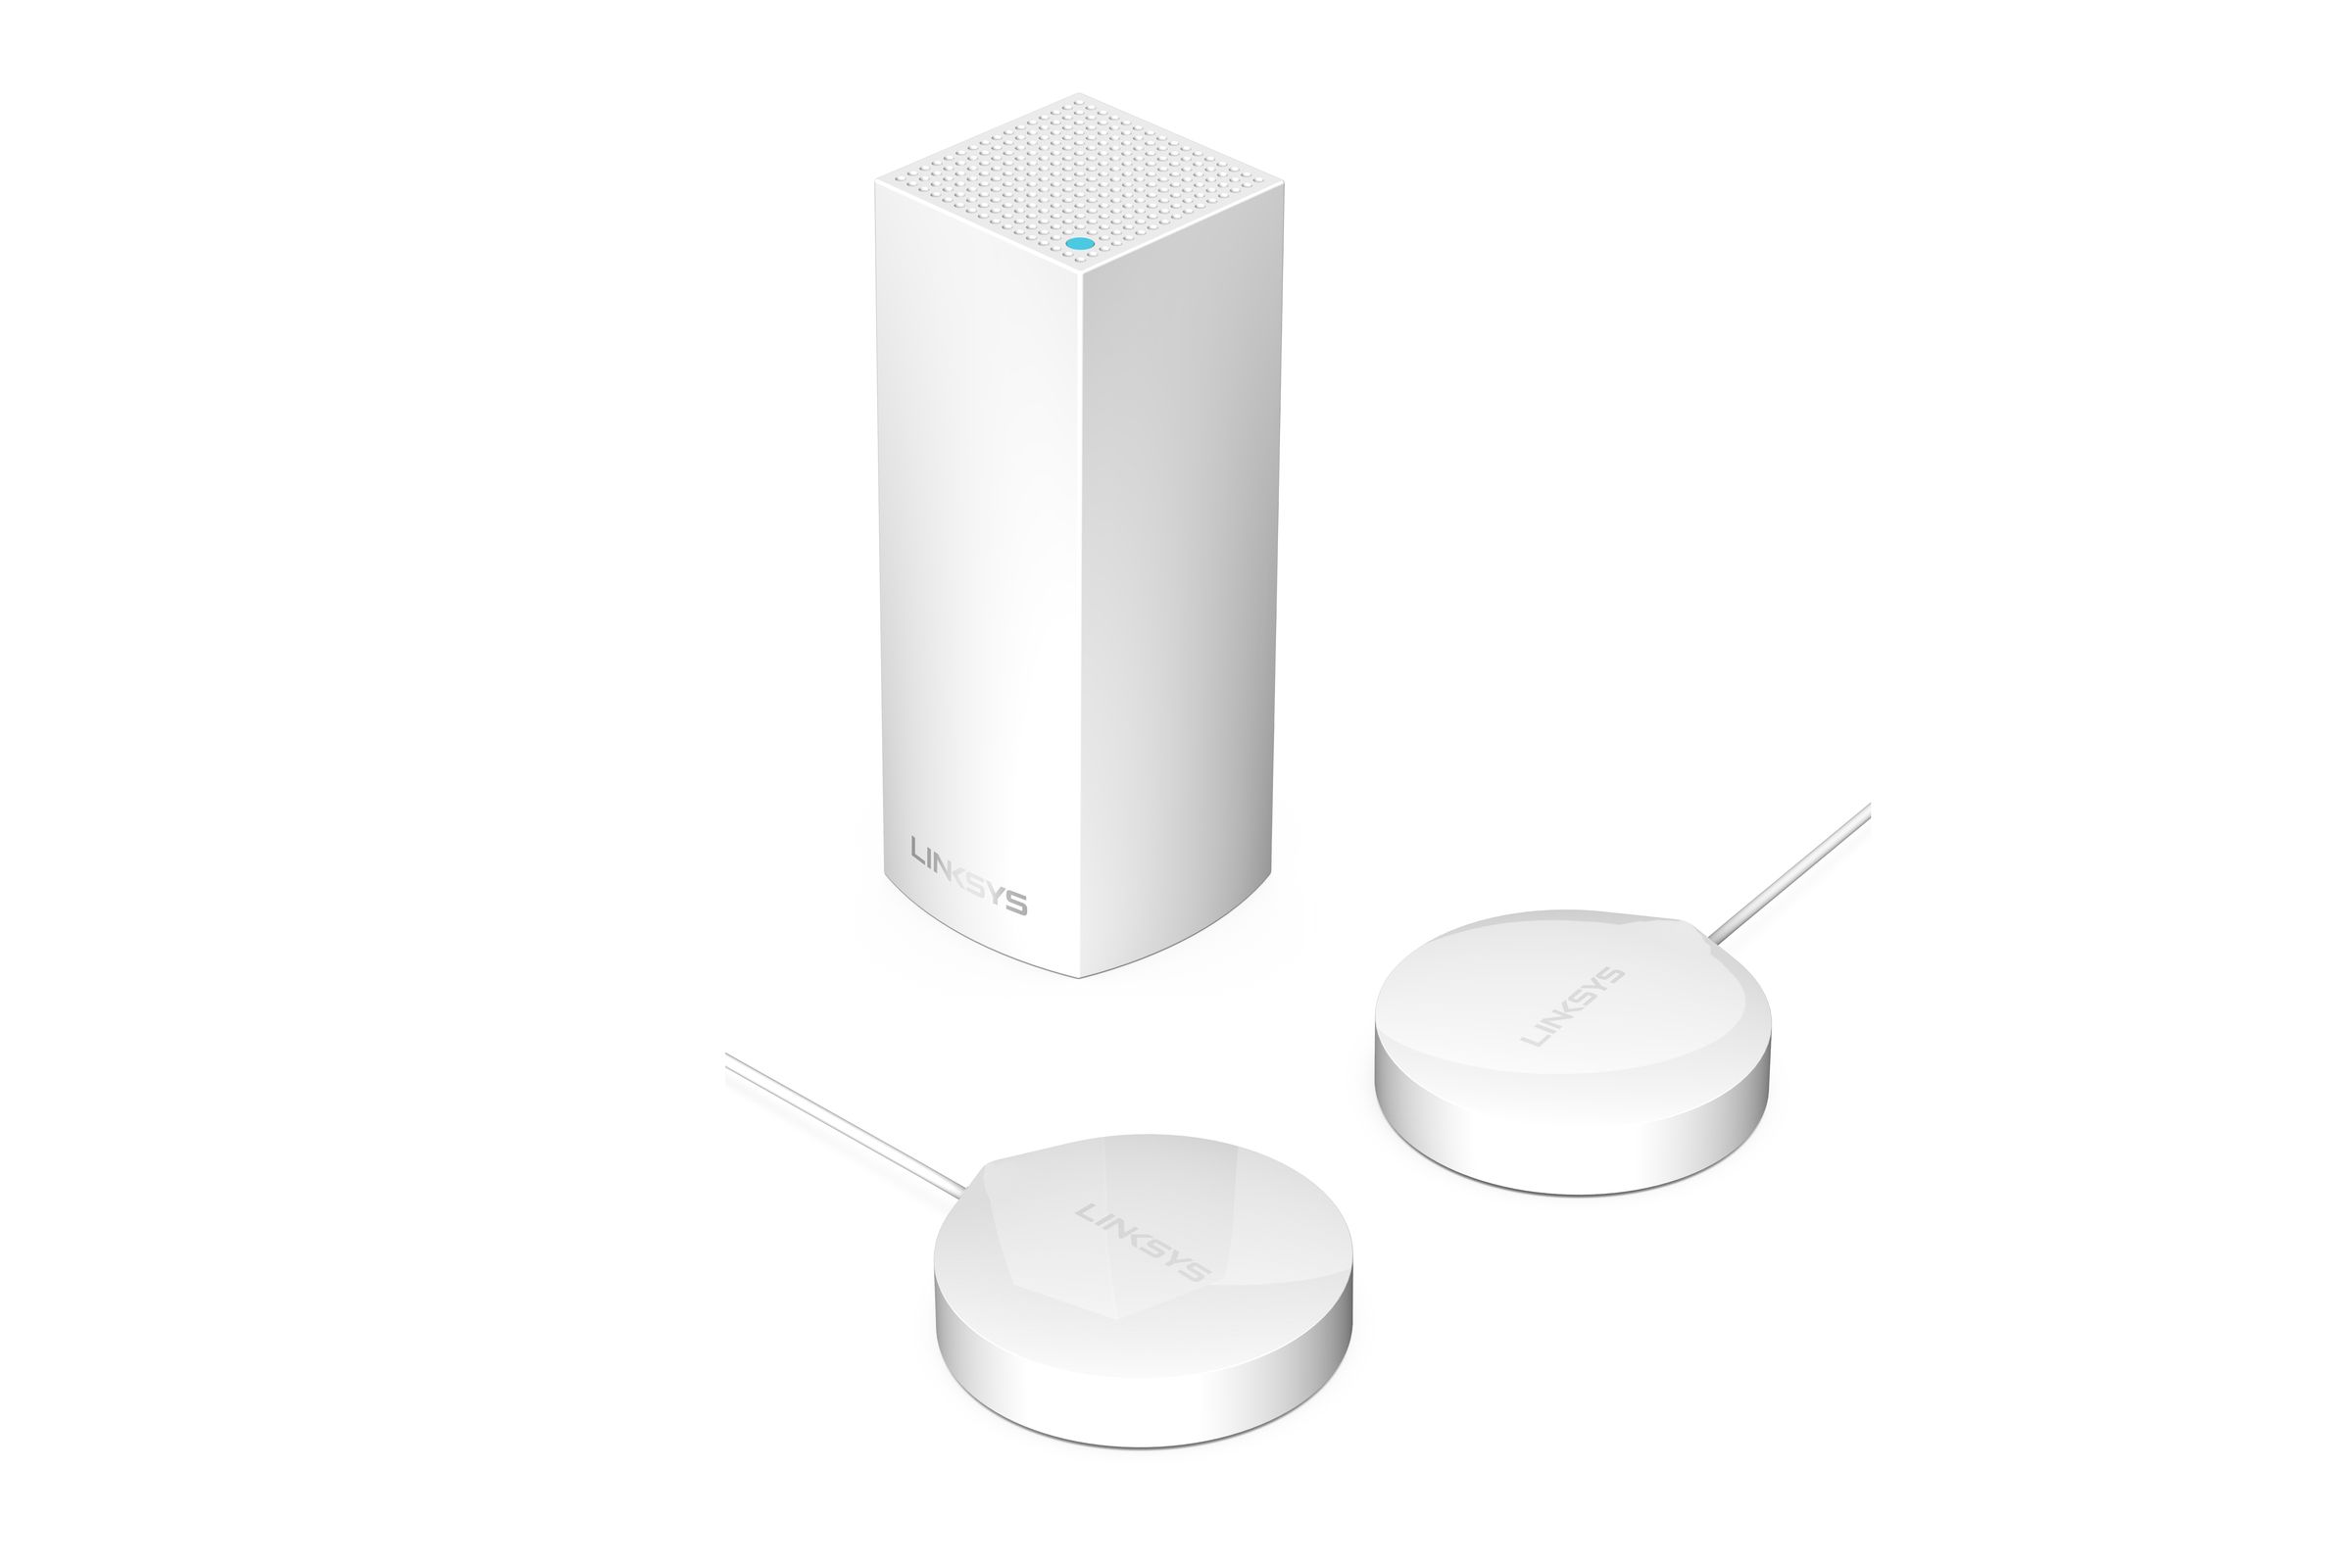 Linksys Wellness Pods next to a Velop mesh router.